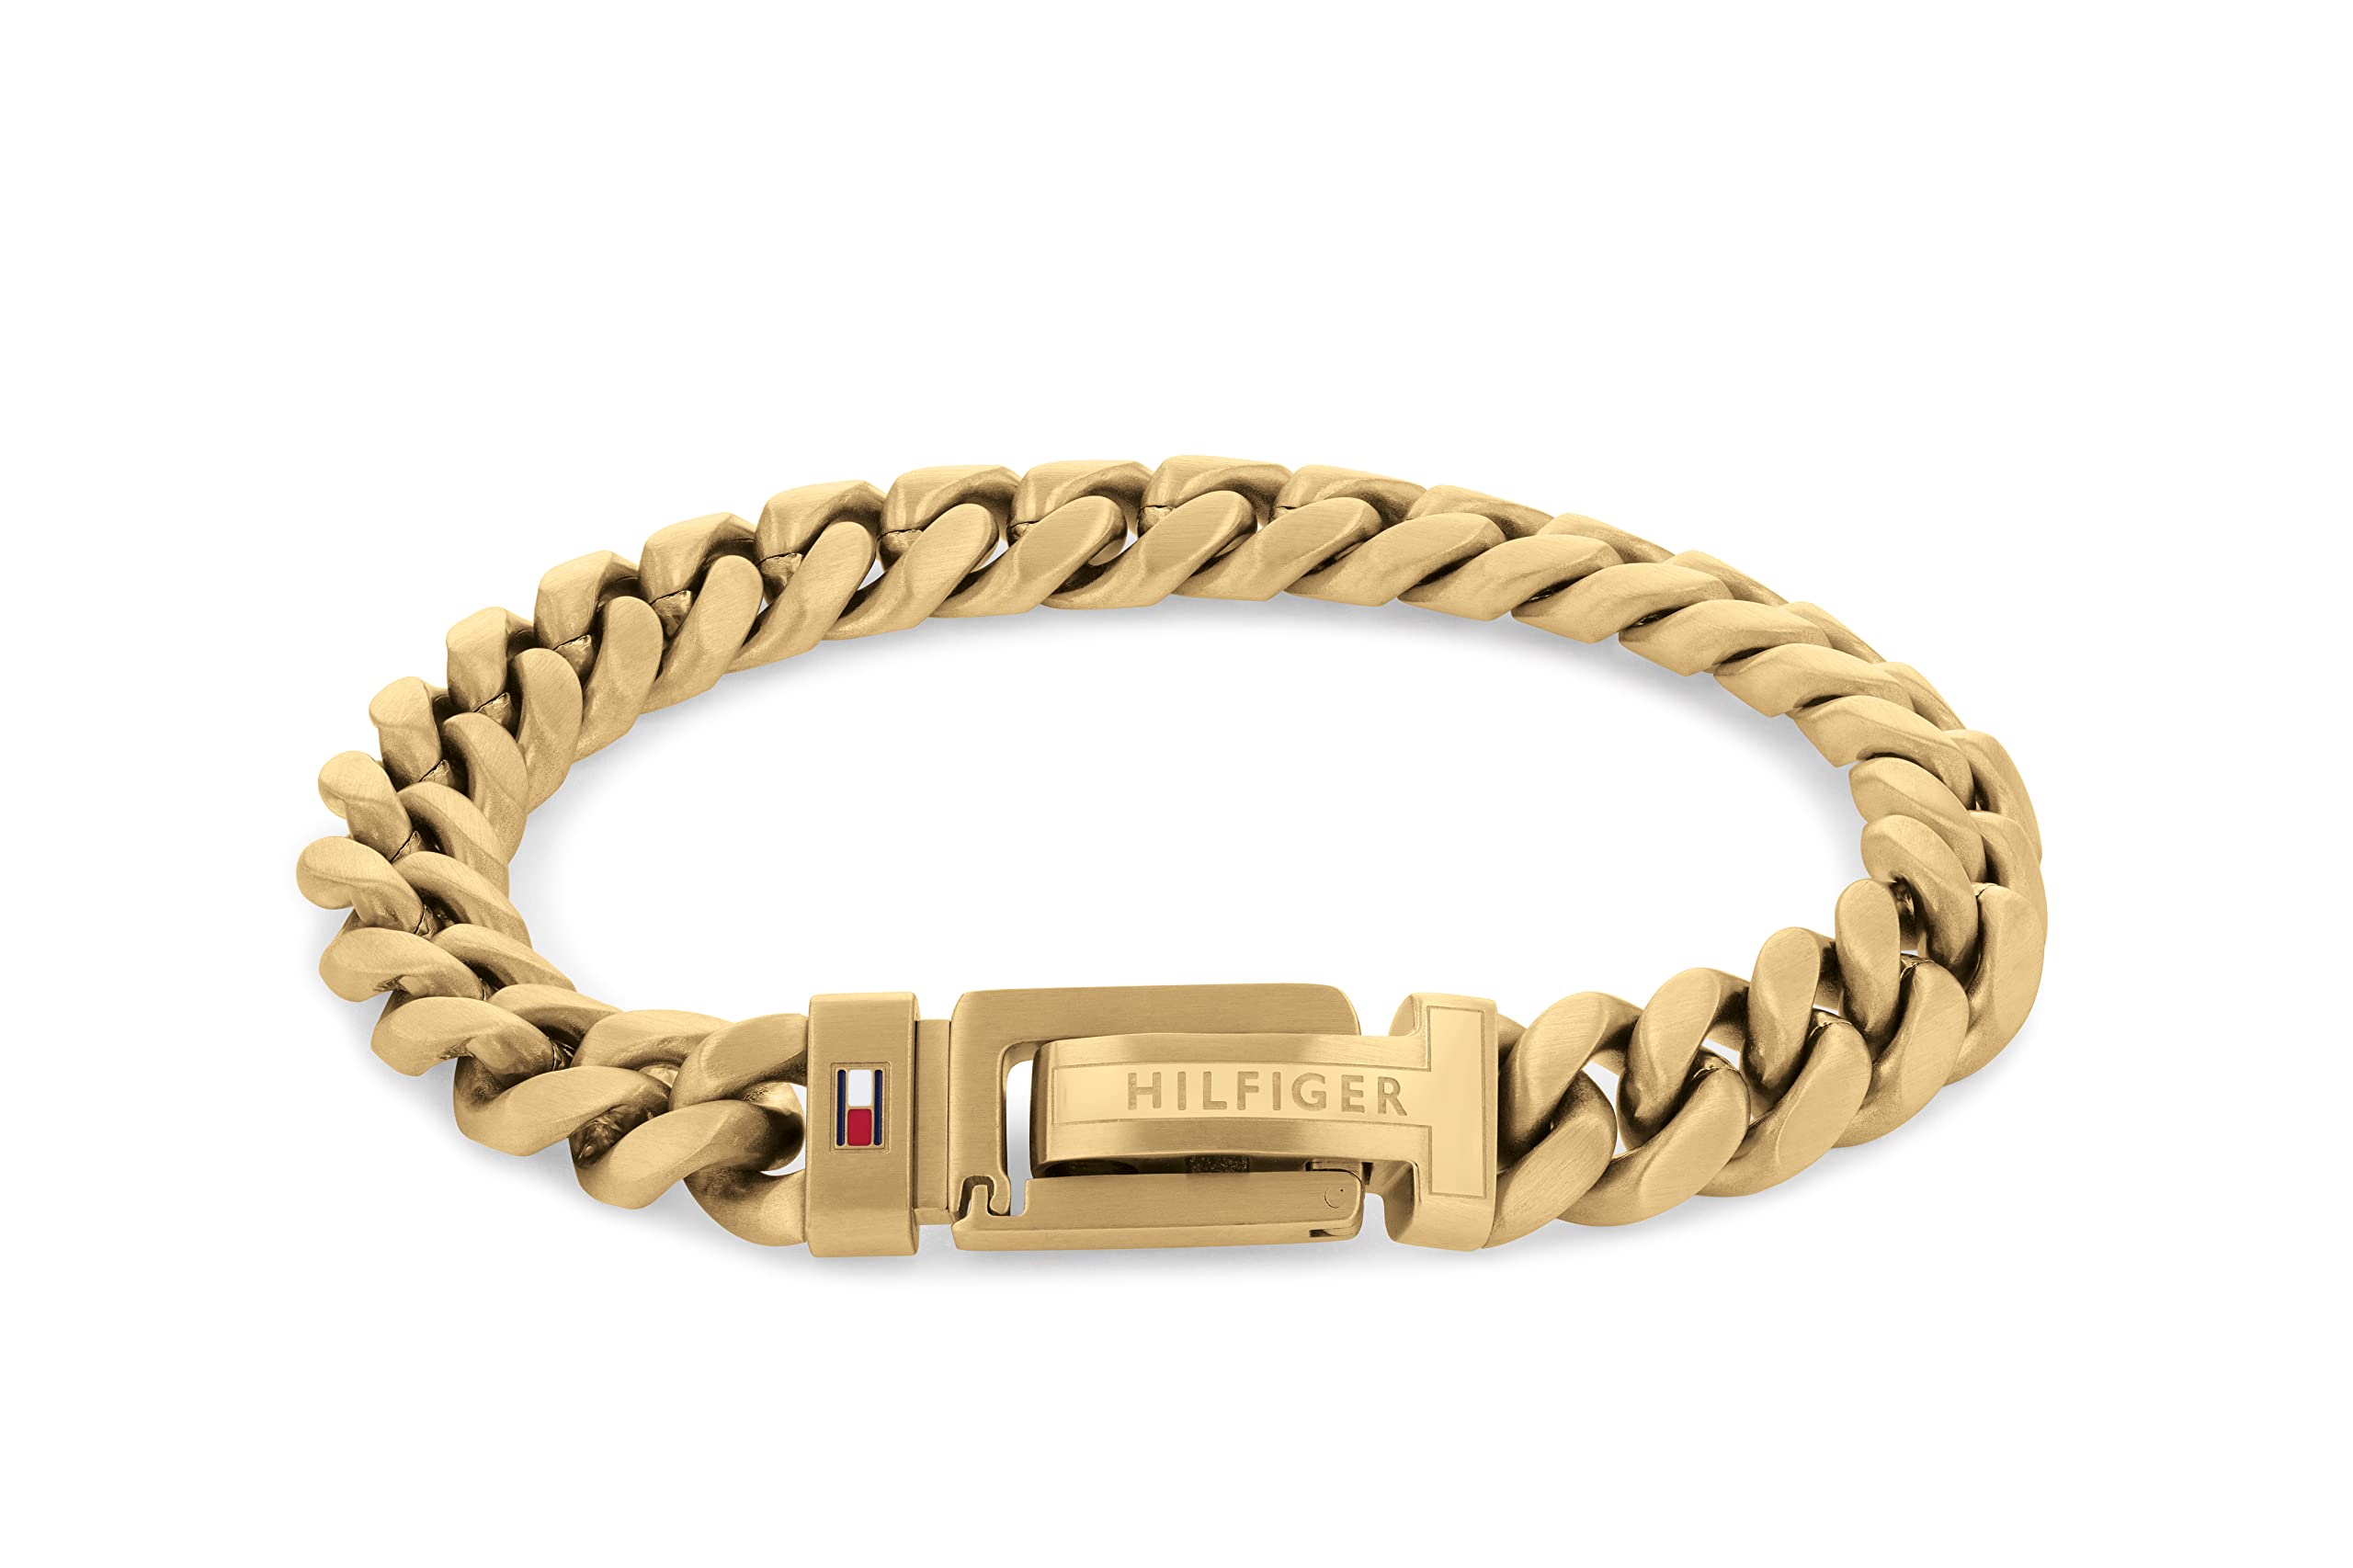 Tommy Hilfiger Men's Jewelry Ionic Thin Steel Chain Bracelet, Color: Gold Plated (Model: 2790434)